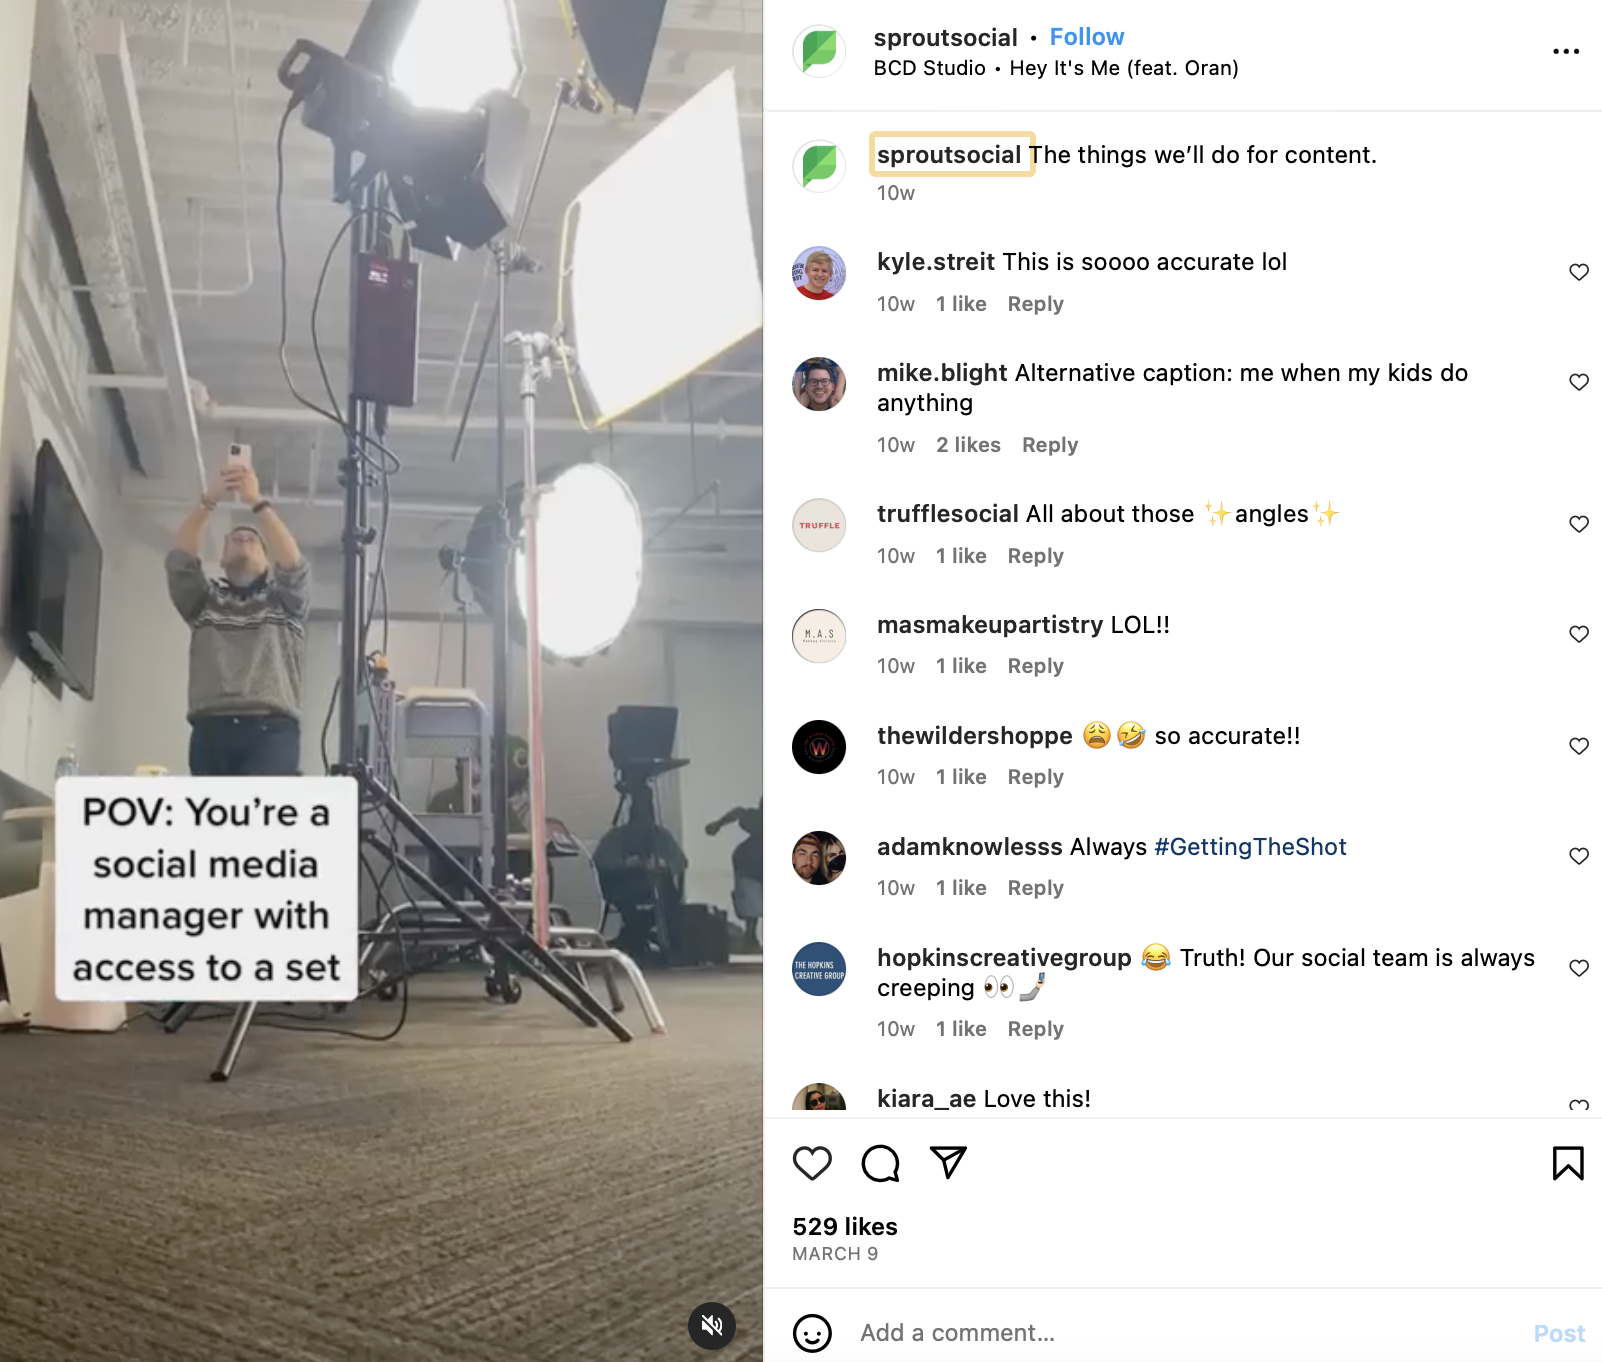 Sprout Social's Instagram post of a man taking a photo in a set and a text overlay saying "POV: You're a social media manager with access to a set"